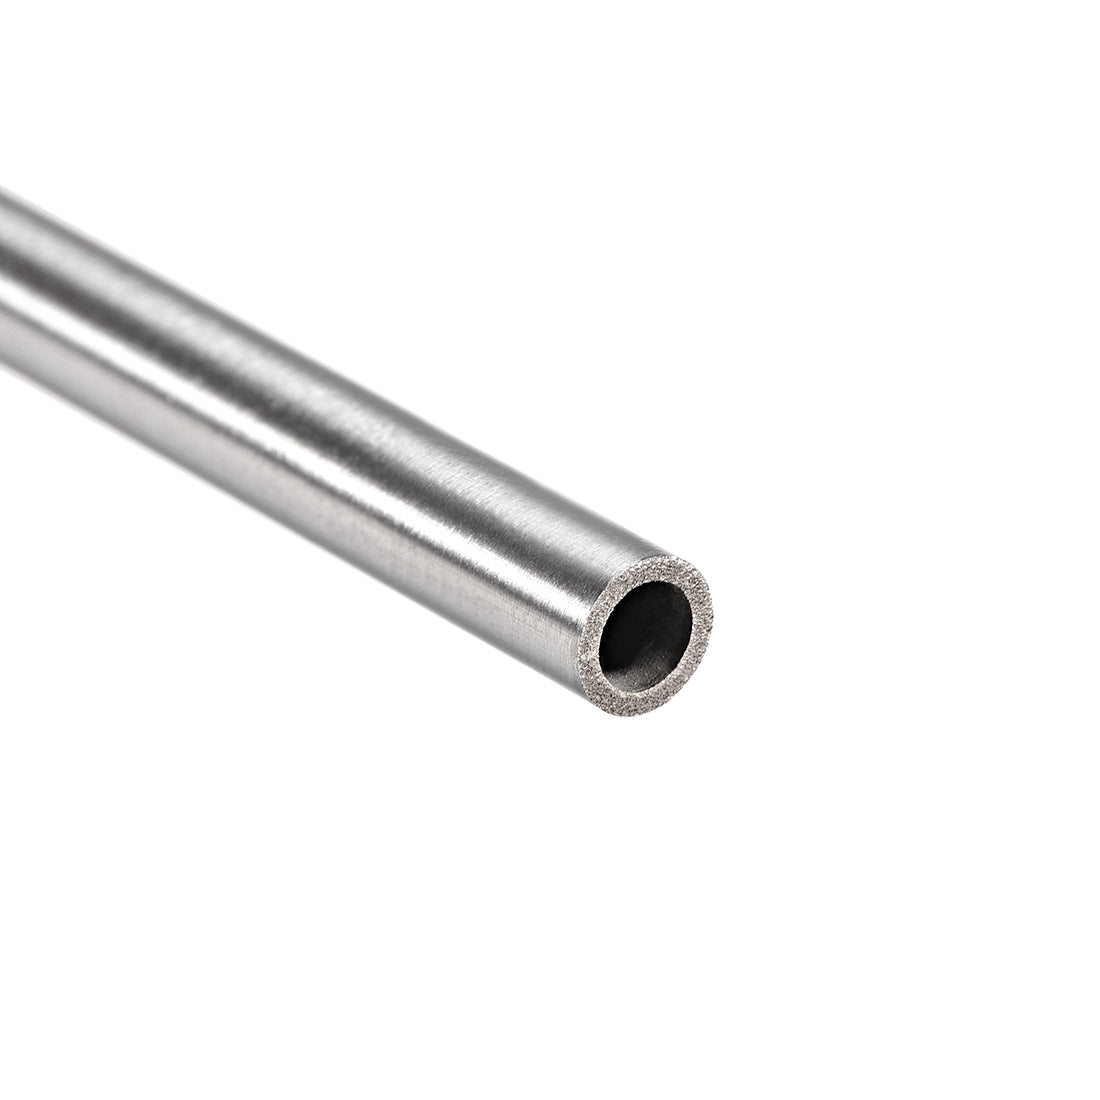 uxcell Uxcell 304 Stainless Steel Capillary Tube 4.95mm ID 6.35mm OD 300mm Long 0.7mm Wall